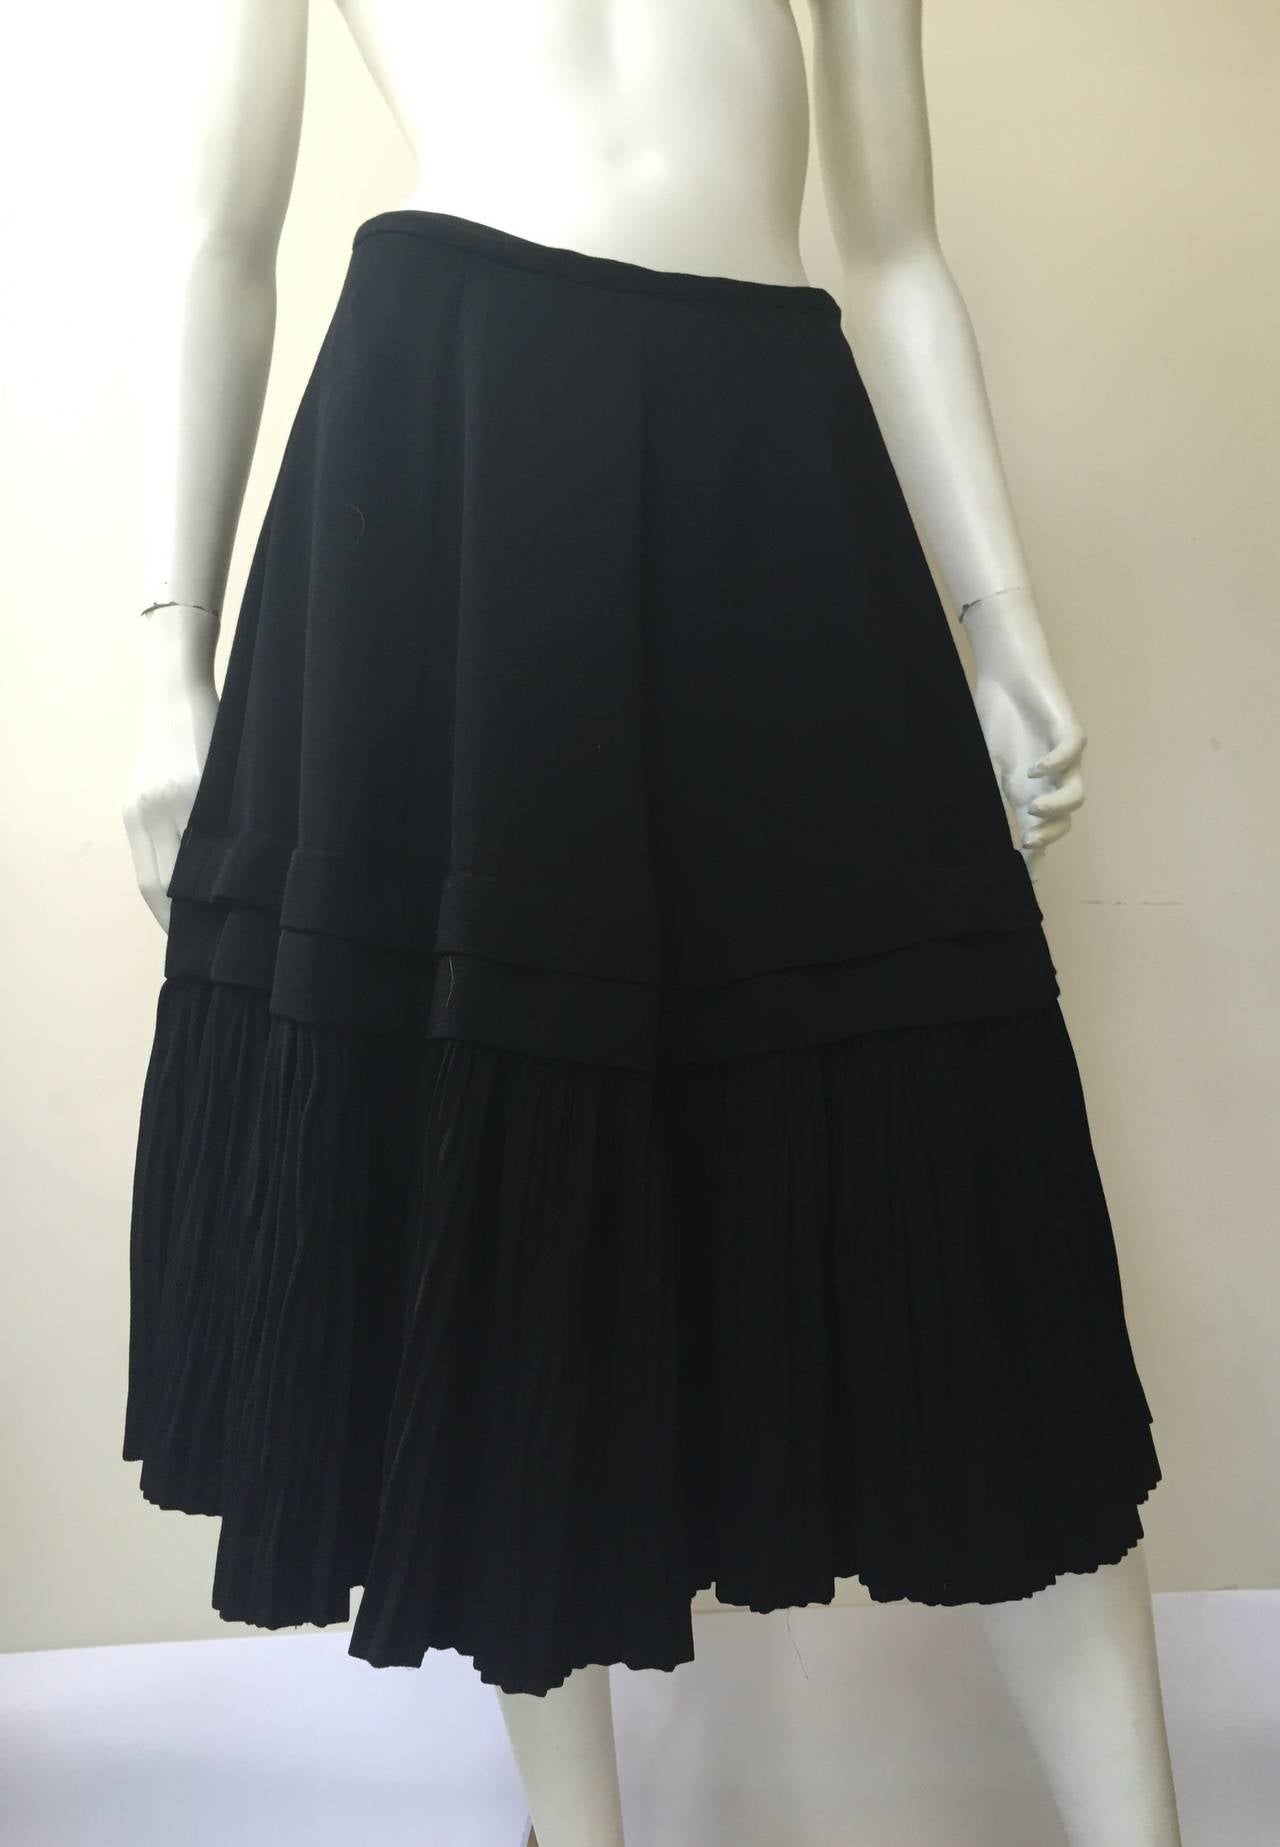 Comme des Garcons by Rei Kawakubo for Bergdorf Goodman 80s black wool pleated bottom skirt size medium. Made in Japan. 
Skirt is lined.
Zipper on side.
Measurements are:
27